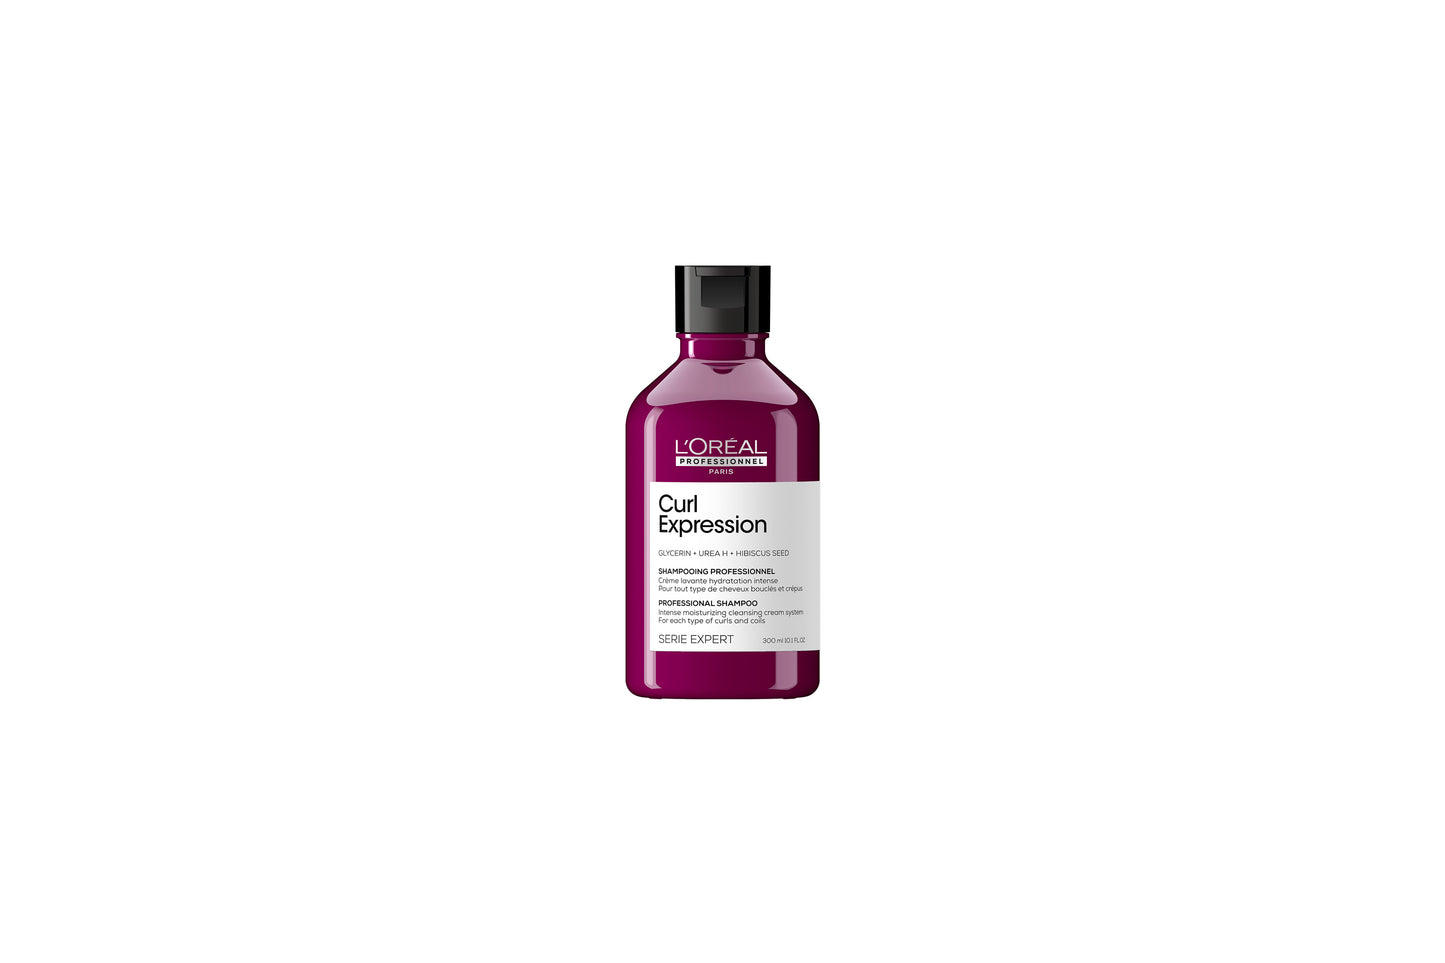 L'Oreal Curl Expression Moisturising and Hydrating Shampoo for Curls and Coils 300ml